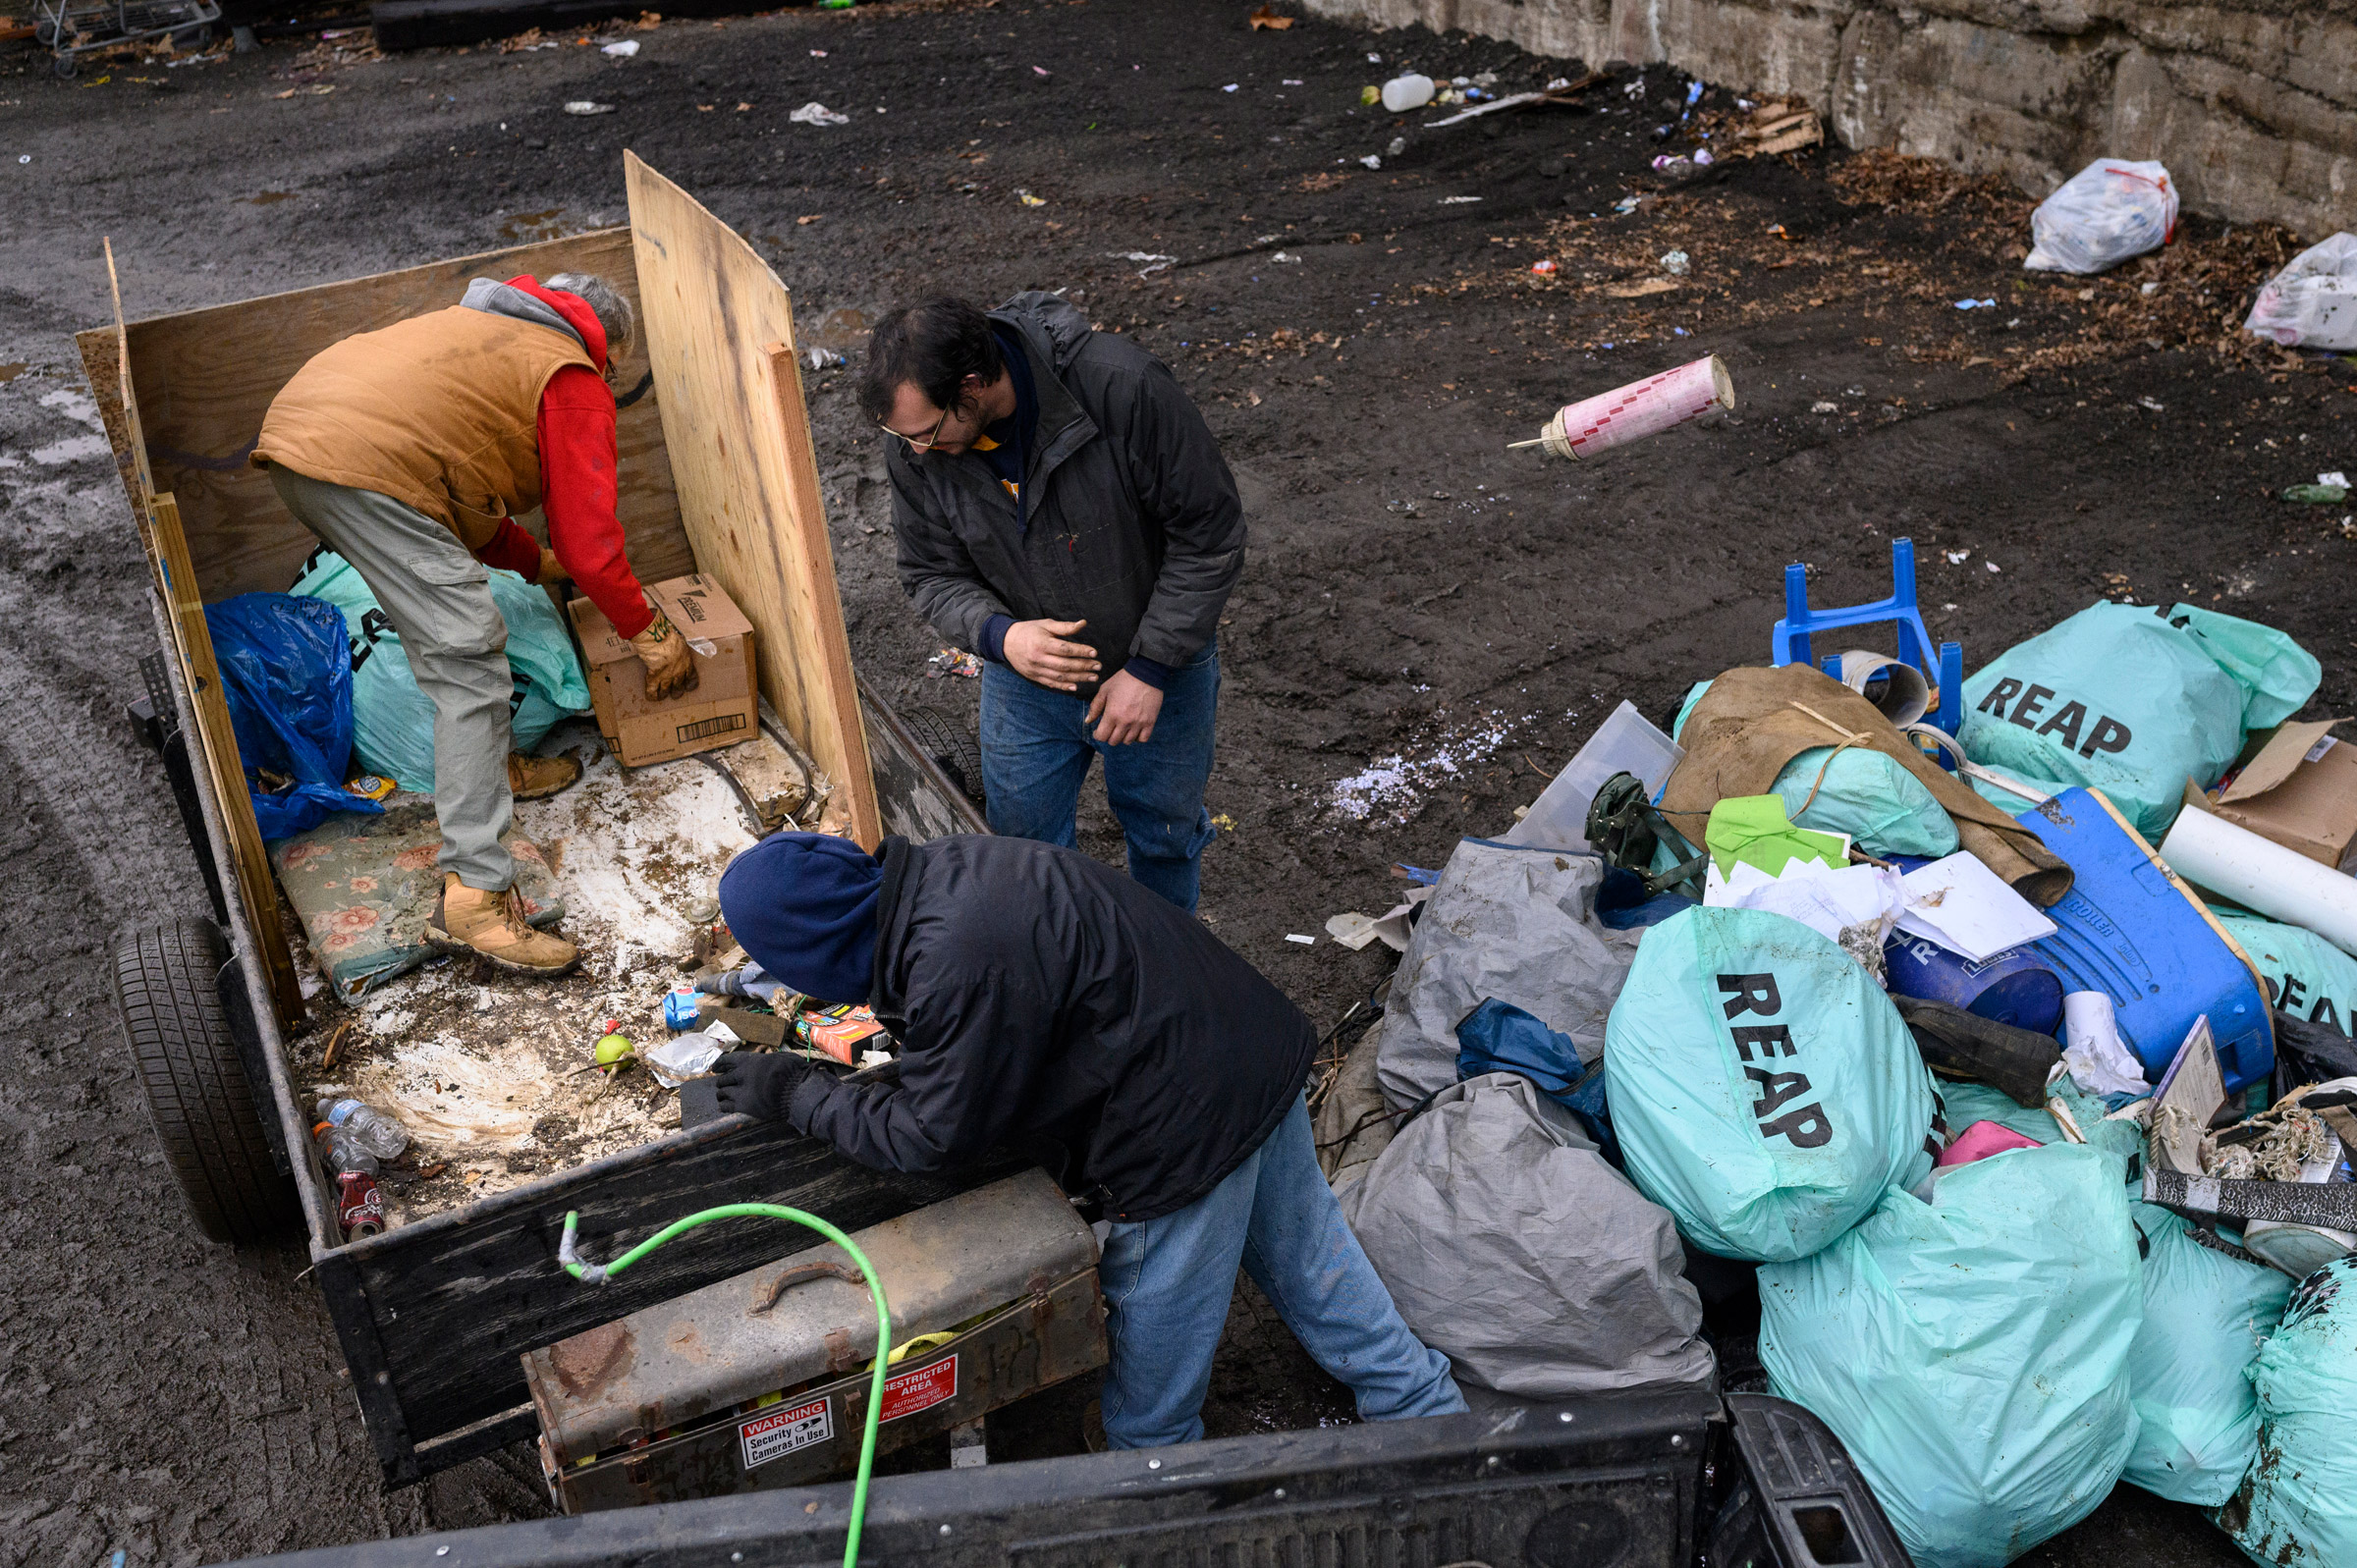 Paula Riethmiller and volunteers Gene and Michael dispose of trash found in encampments at the city dump in Wheeling on Dec. 21. Riethmiller helps lead Trash Talkers, an operation formed during the pandemic by the unhoused to solve trash accumulation in their tent encampments. Unhoused volunteers can earn gift cards and items such as phones through their volunteerism with the program.